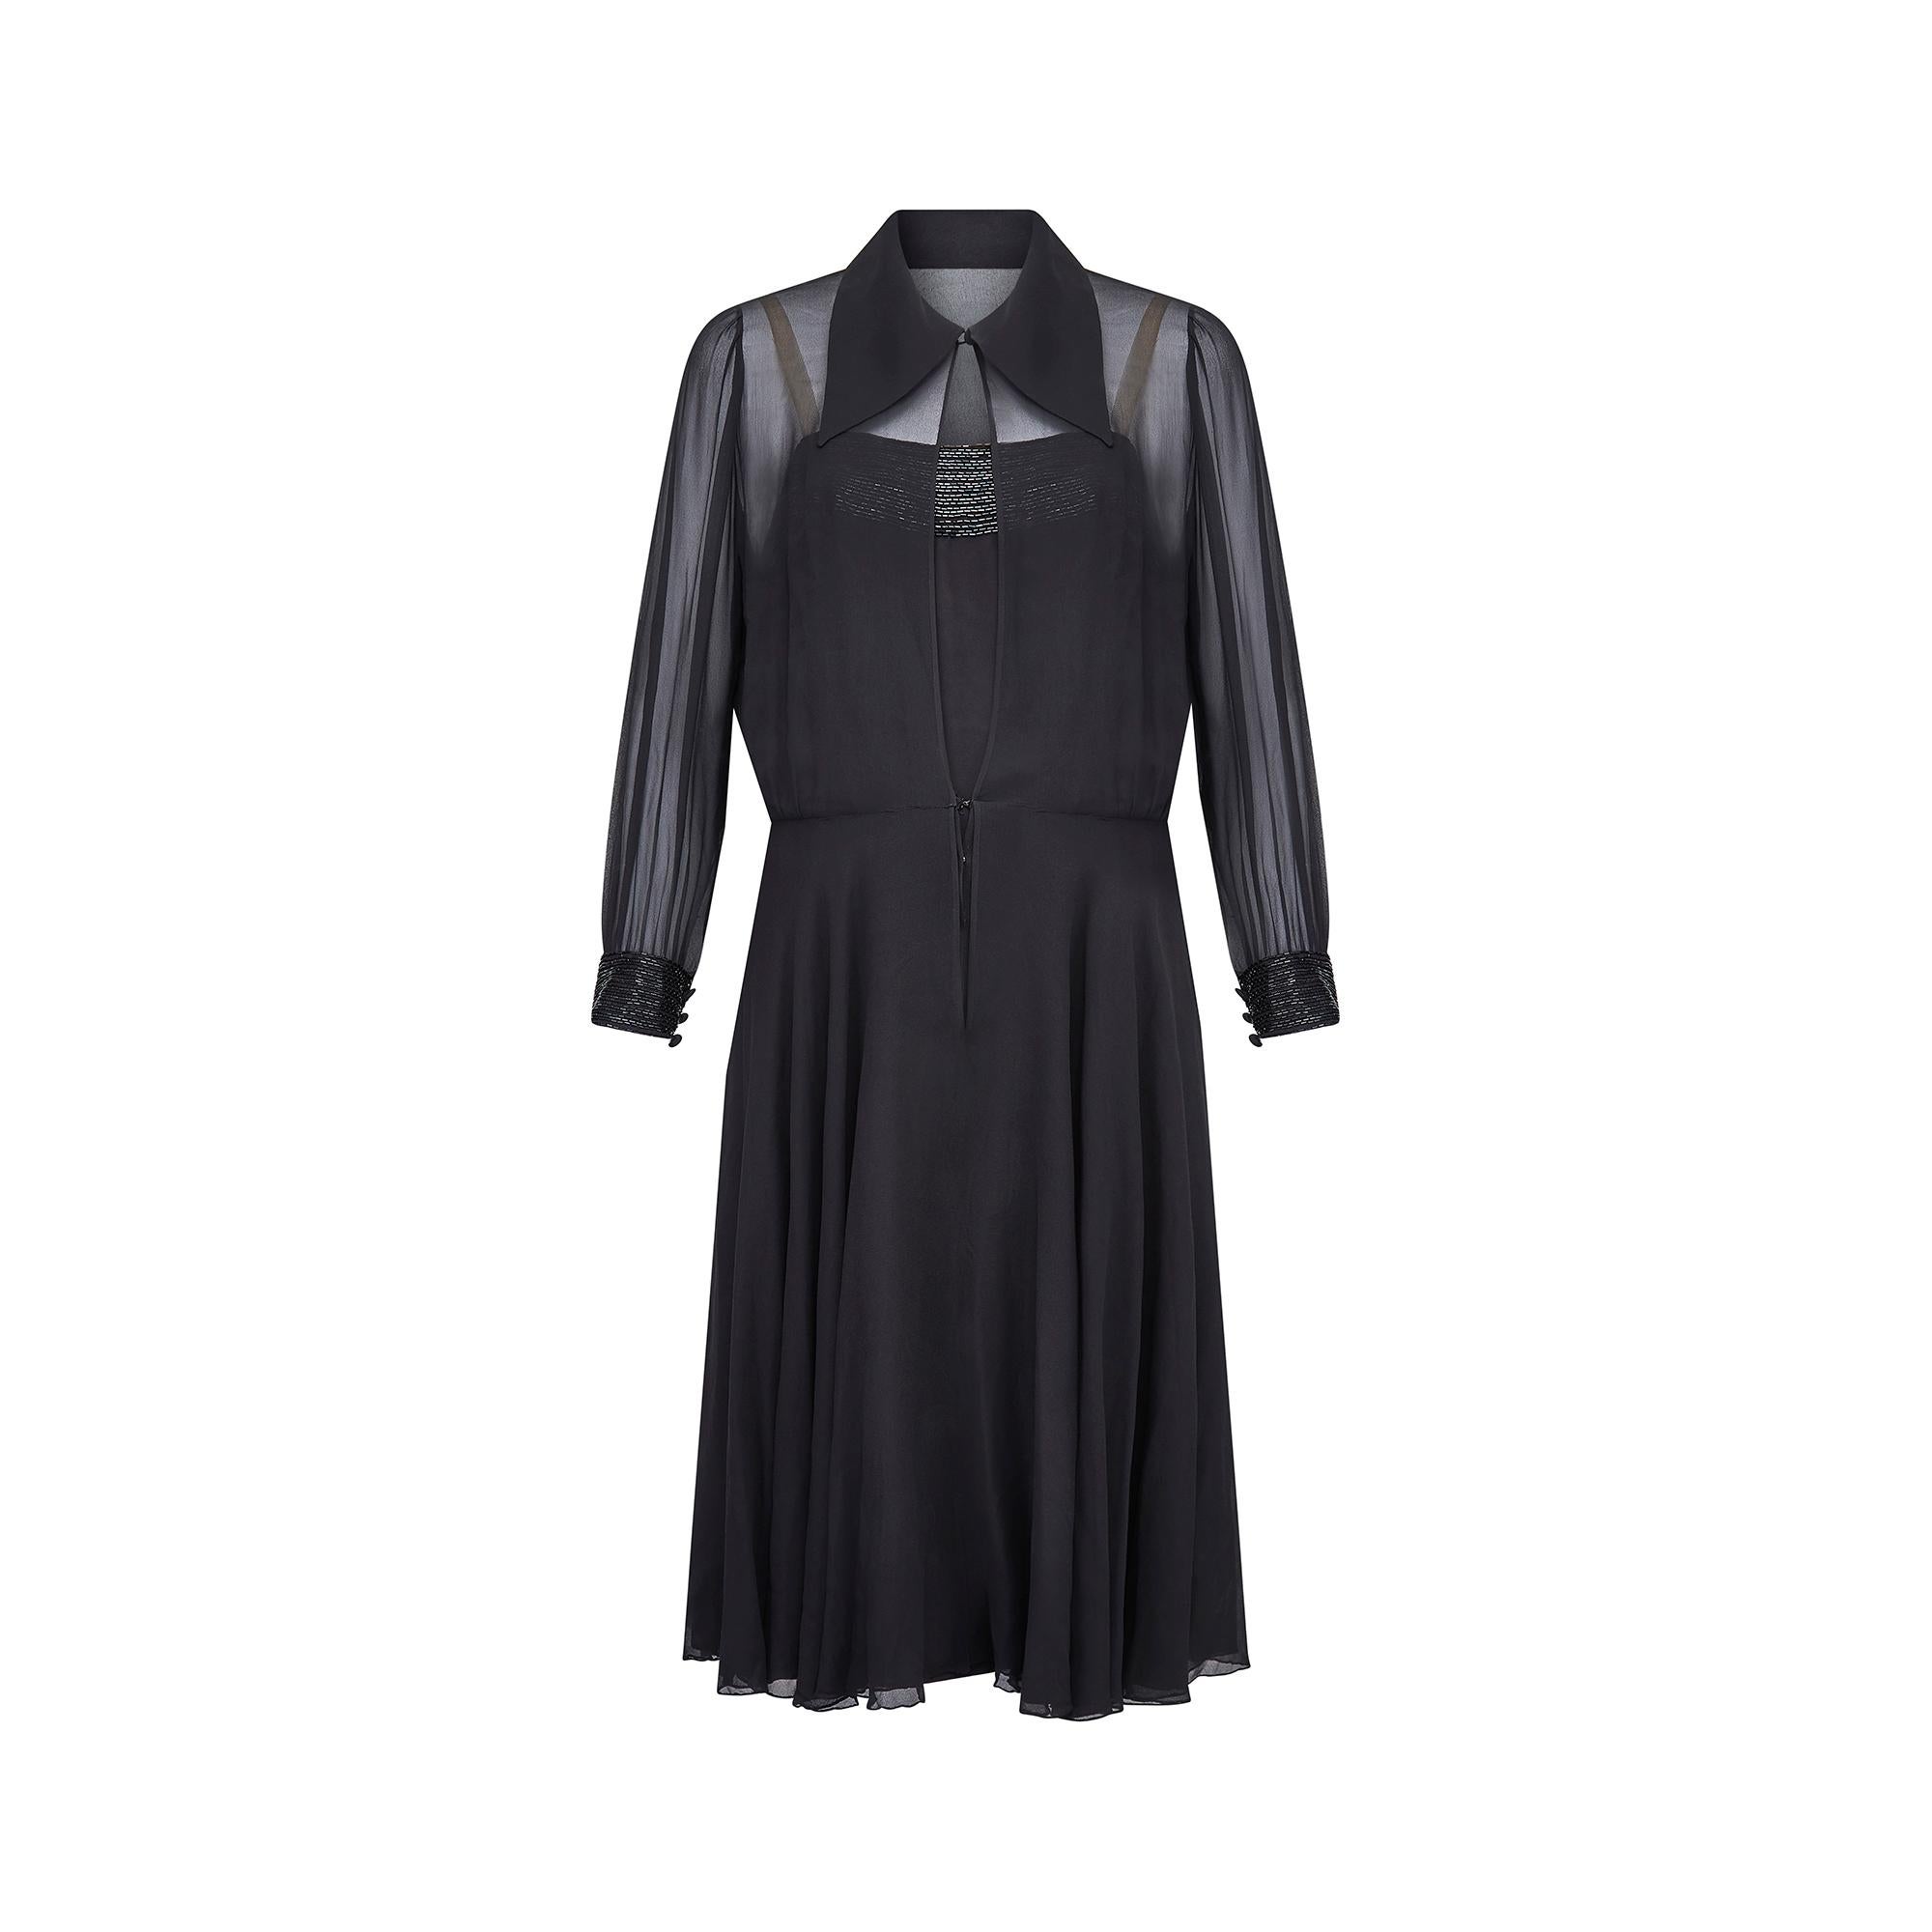 Designed by Jacqueline Godard in the late 1960s or early 1970s this elegant ensemble is formed of a slip dress and sheer, shirt-dress style top layer. Crafted from black finest silk chiffon, the pretty shirt layer has beaded cuffs, a double-layered